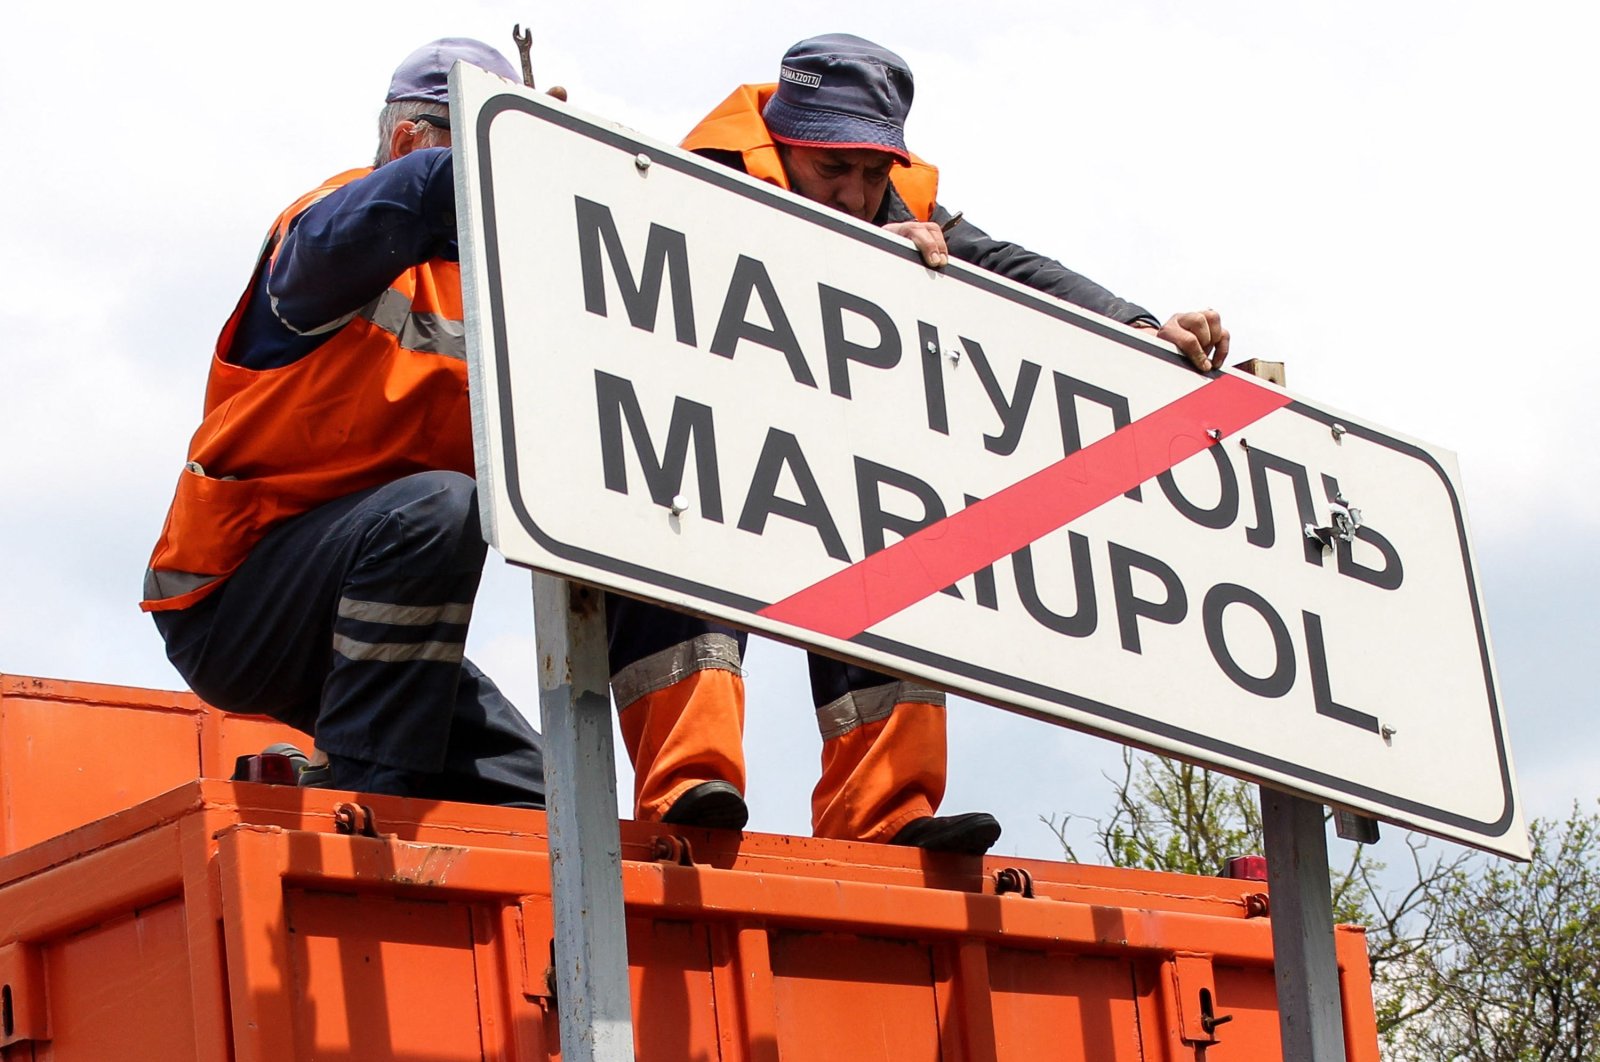 Municipal workers change Ukrainian road signs to Russian outside the city of Mariupol, Ukraine, May 5, 2022. (AFP Photo)